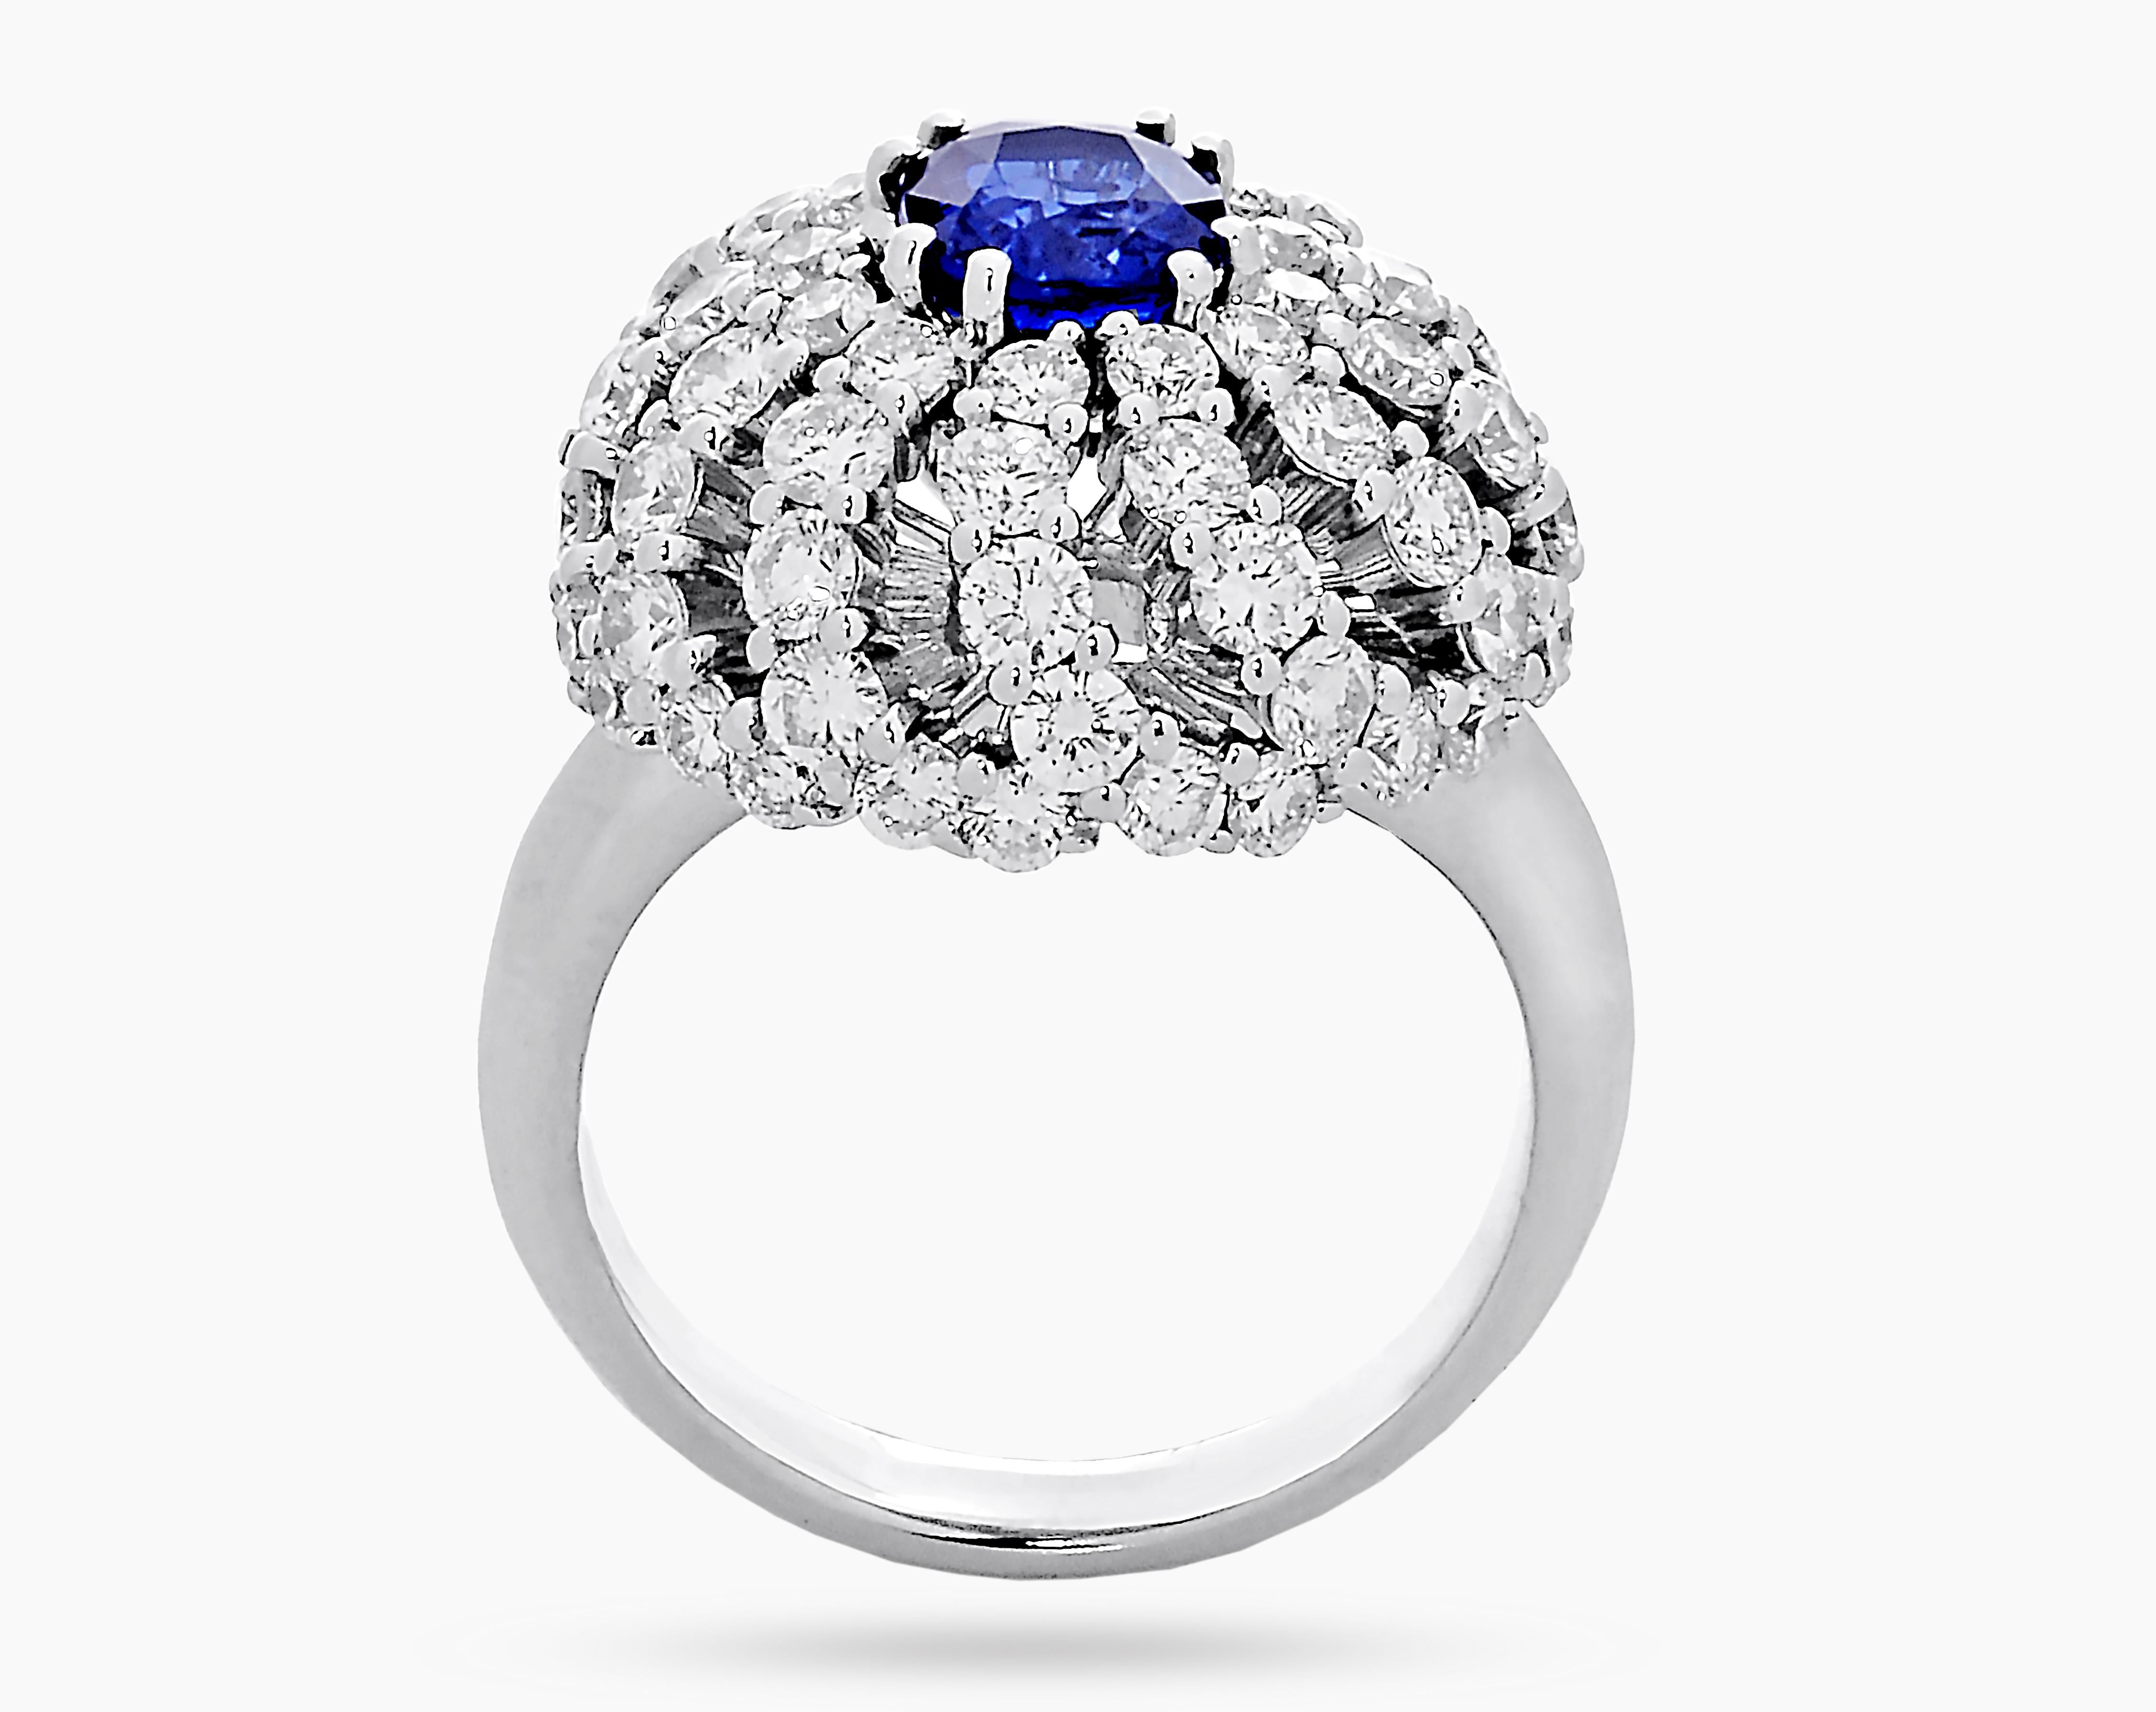 A masterpiece of Italian artistry is this dome shaped ring in 18k white gold. It features a beautiful cushion shaped 1.82 carat Natural Royal Blue Sapphire in the center that is surrounded by 72 F/G-VVS/VS diamonds, totalling 3.37 carats. 

Based on